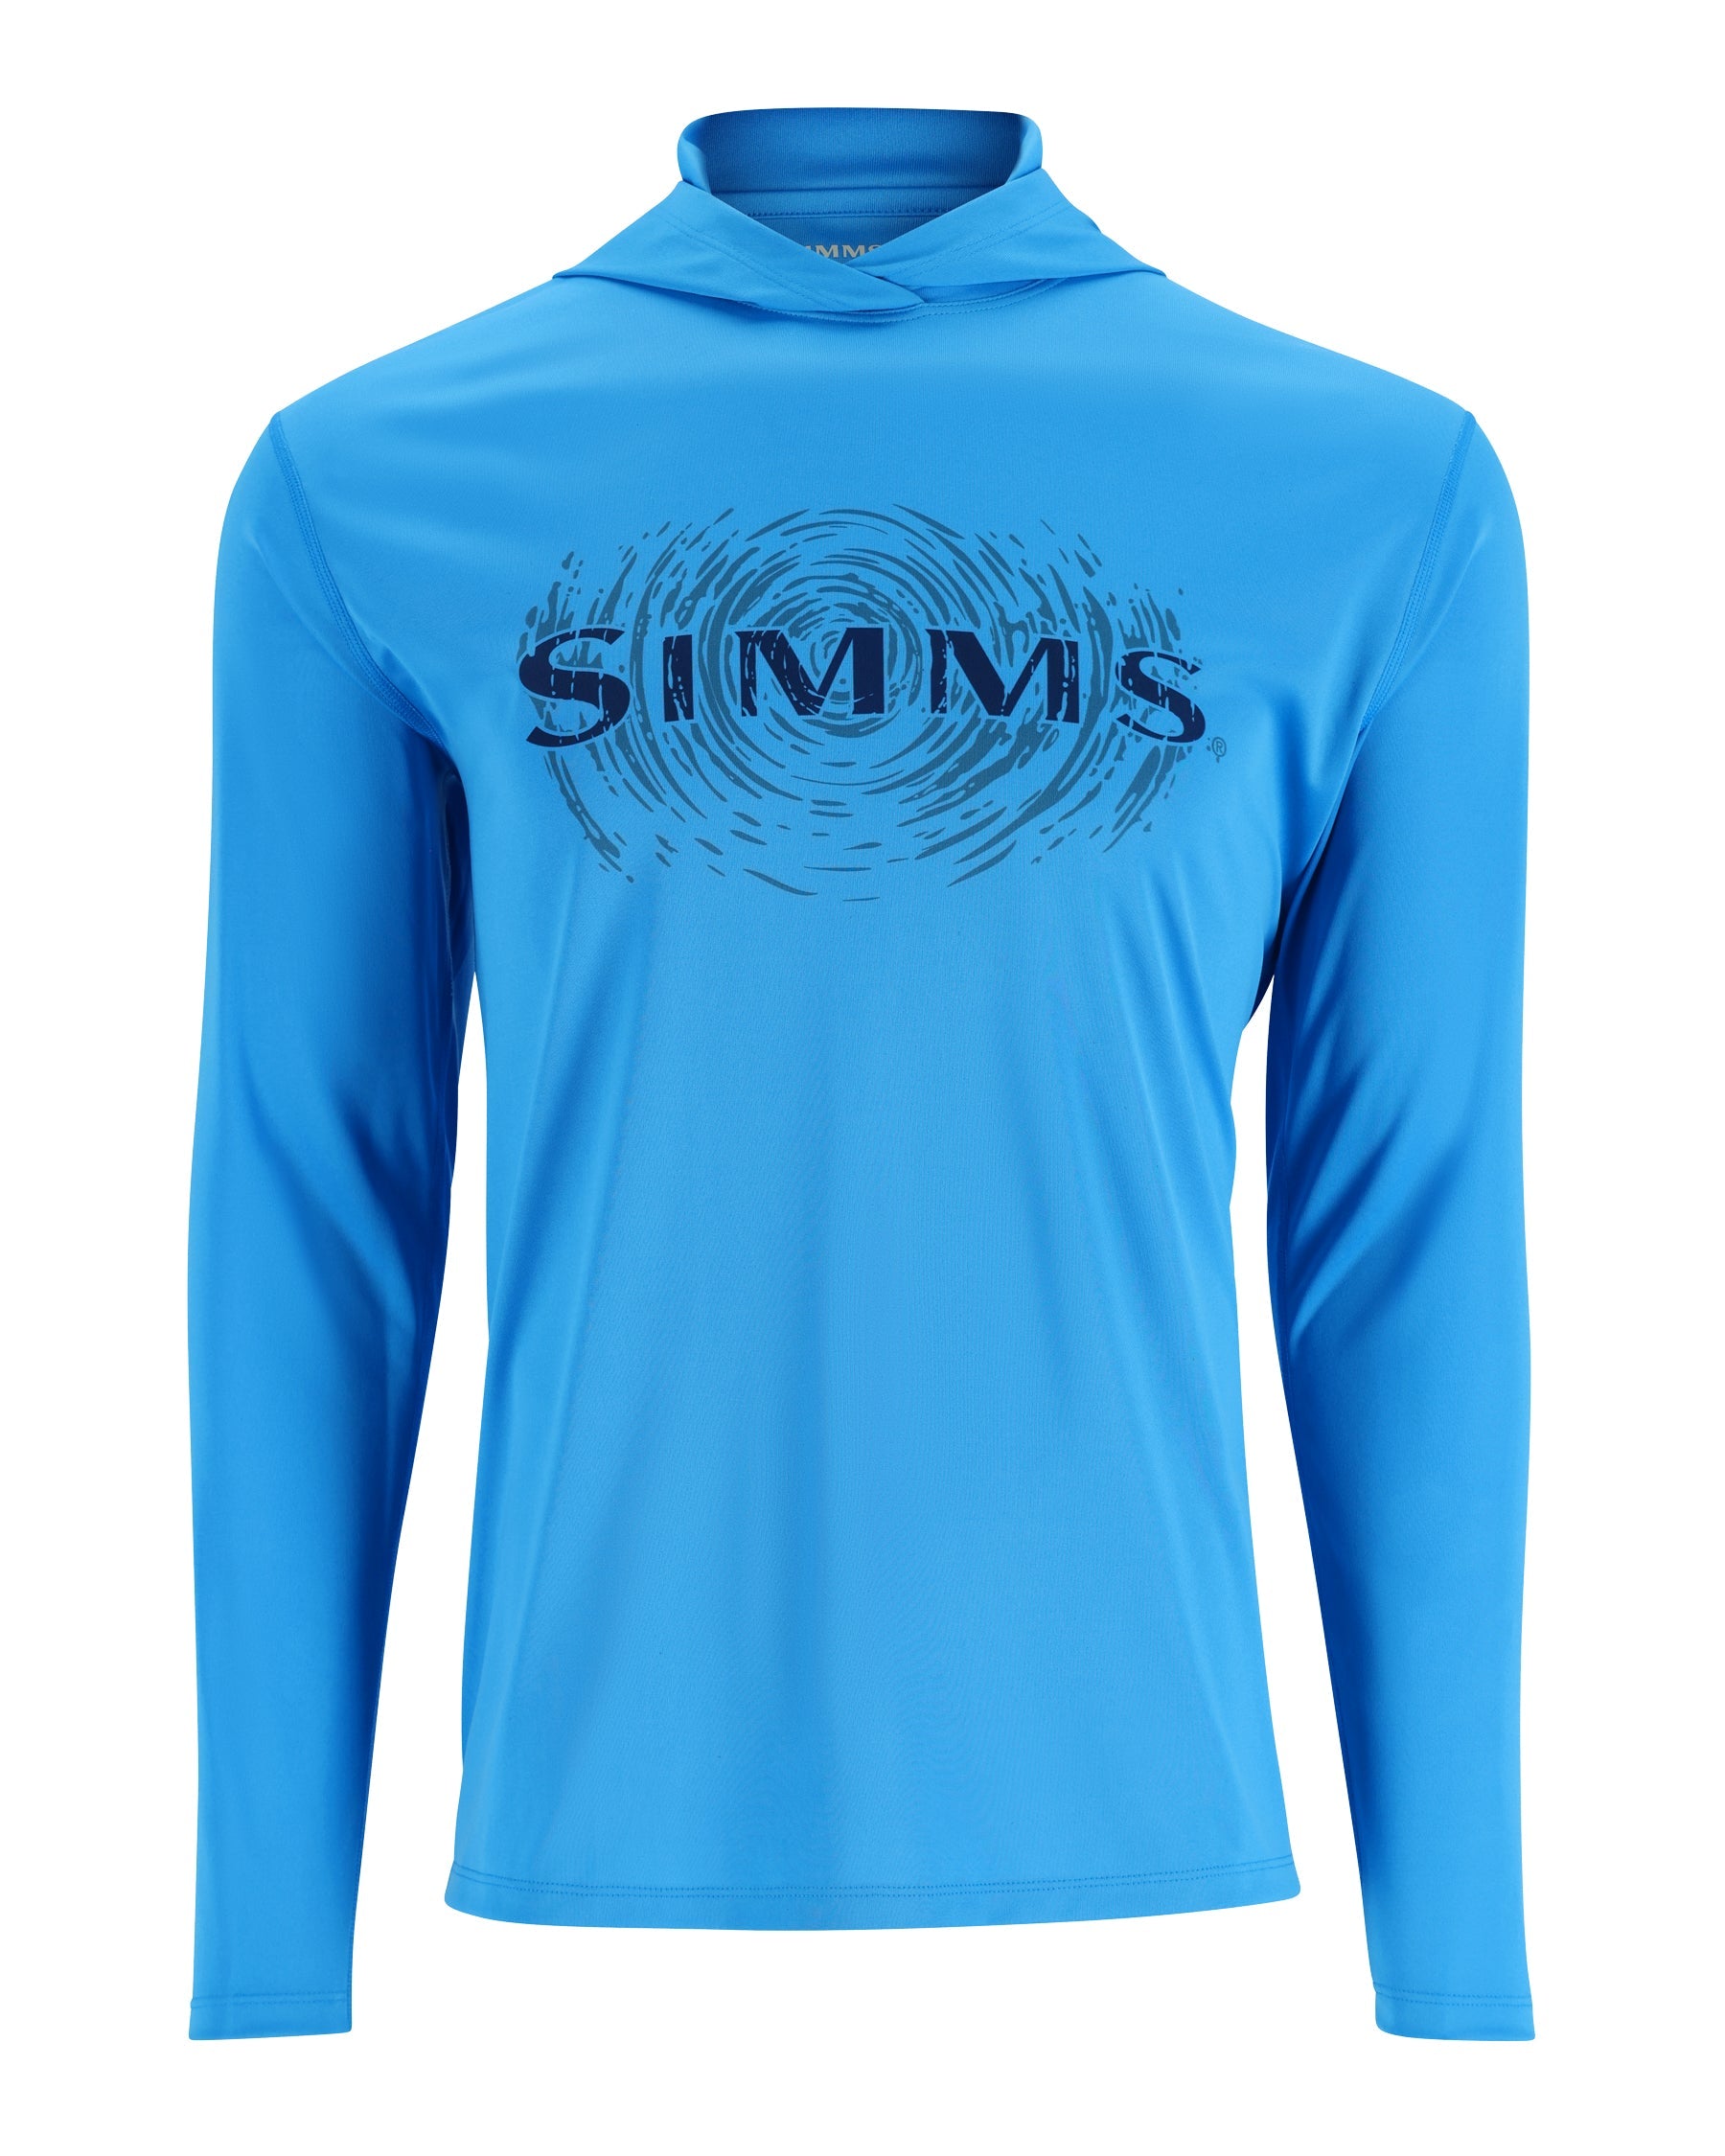 M's Tech Hoody - Artist Series | Simms Fishing Products